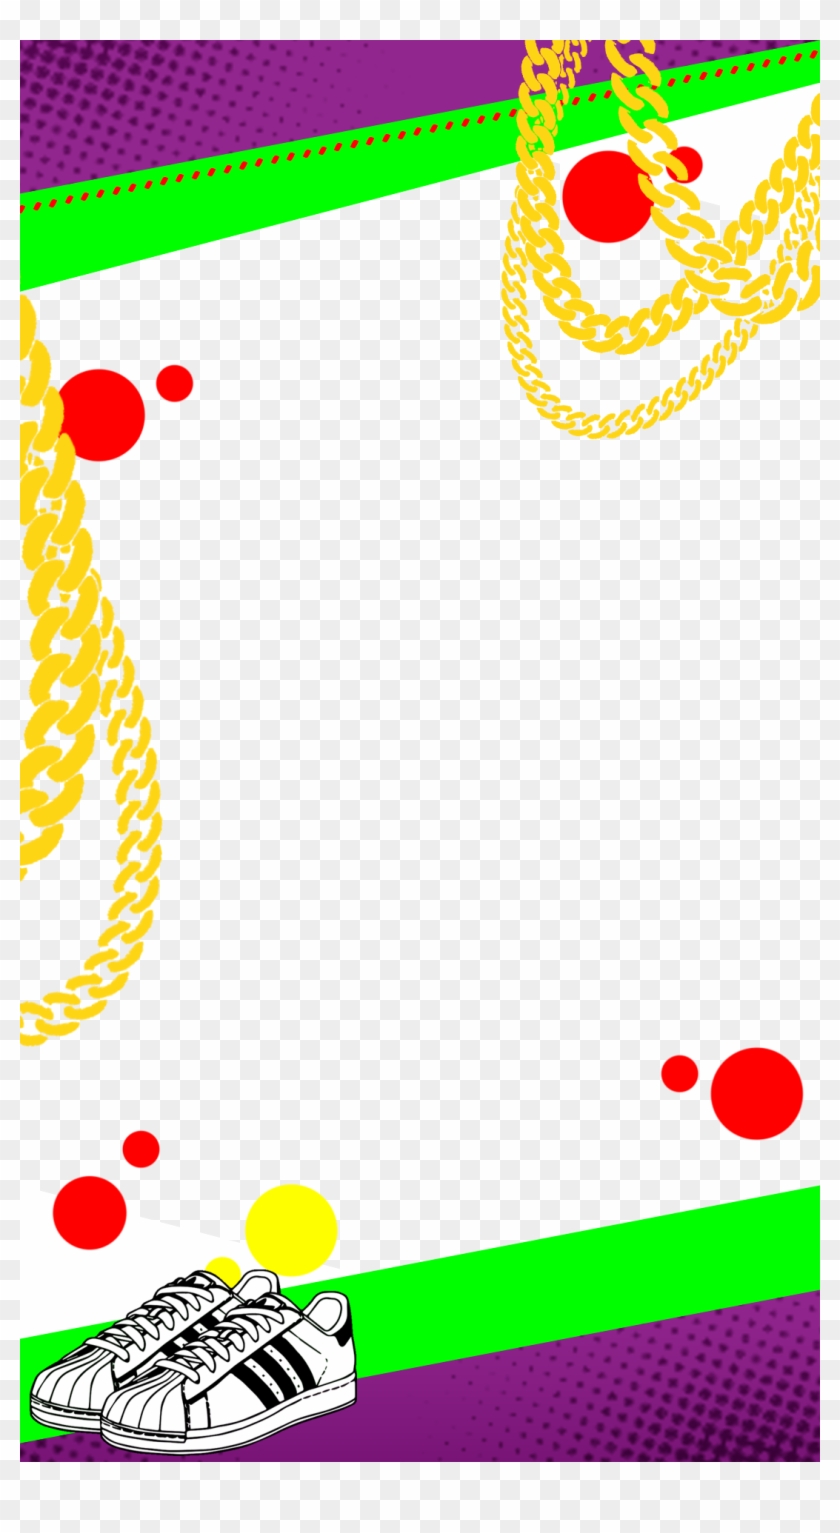 S Or Party Birthday Snapchat Geofilter - 80s Party Snapchat Filter Clipart #2840853